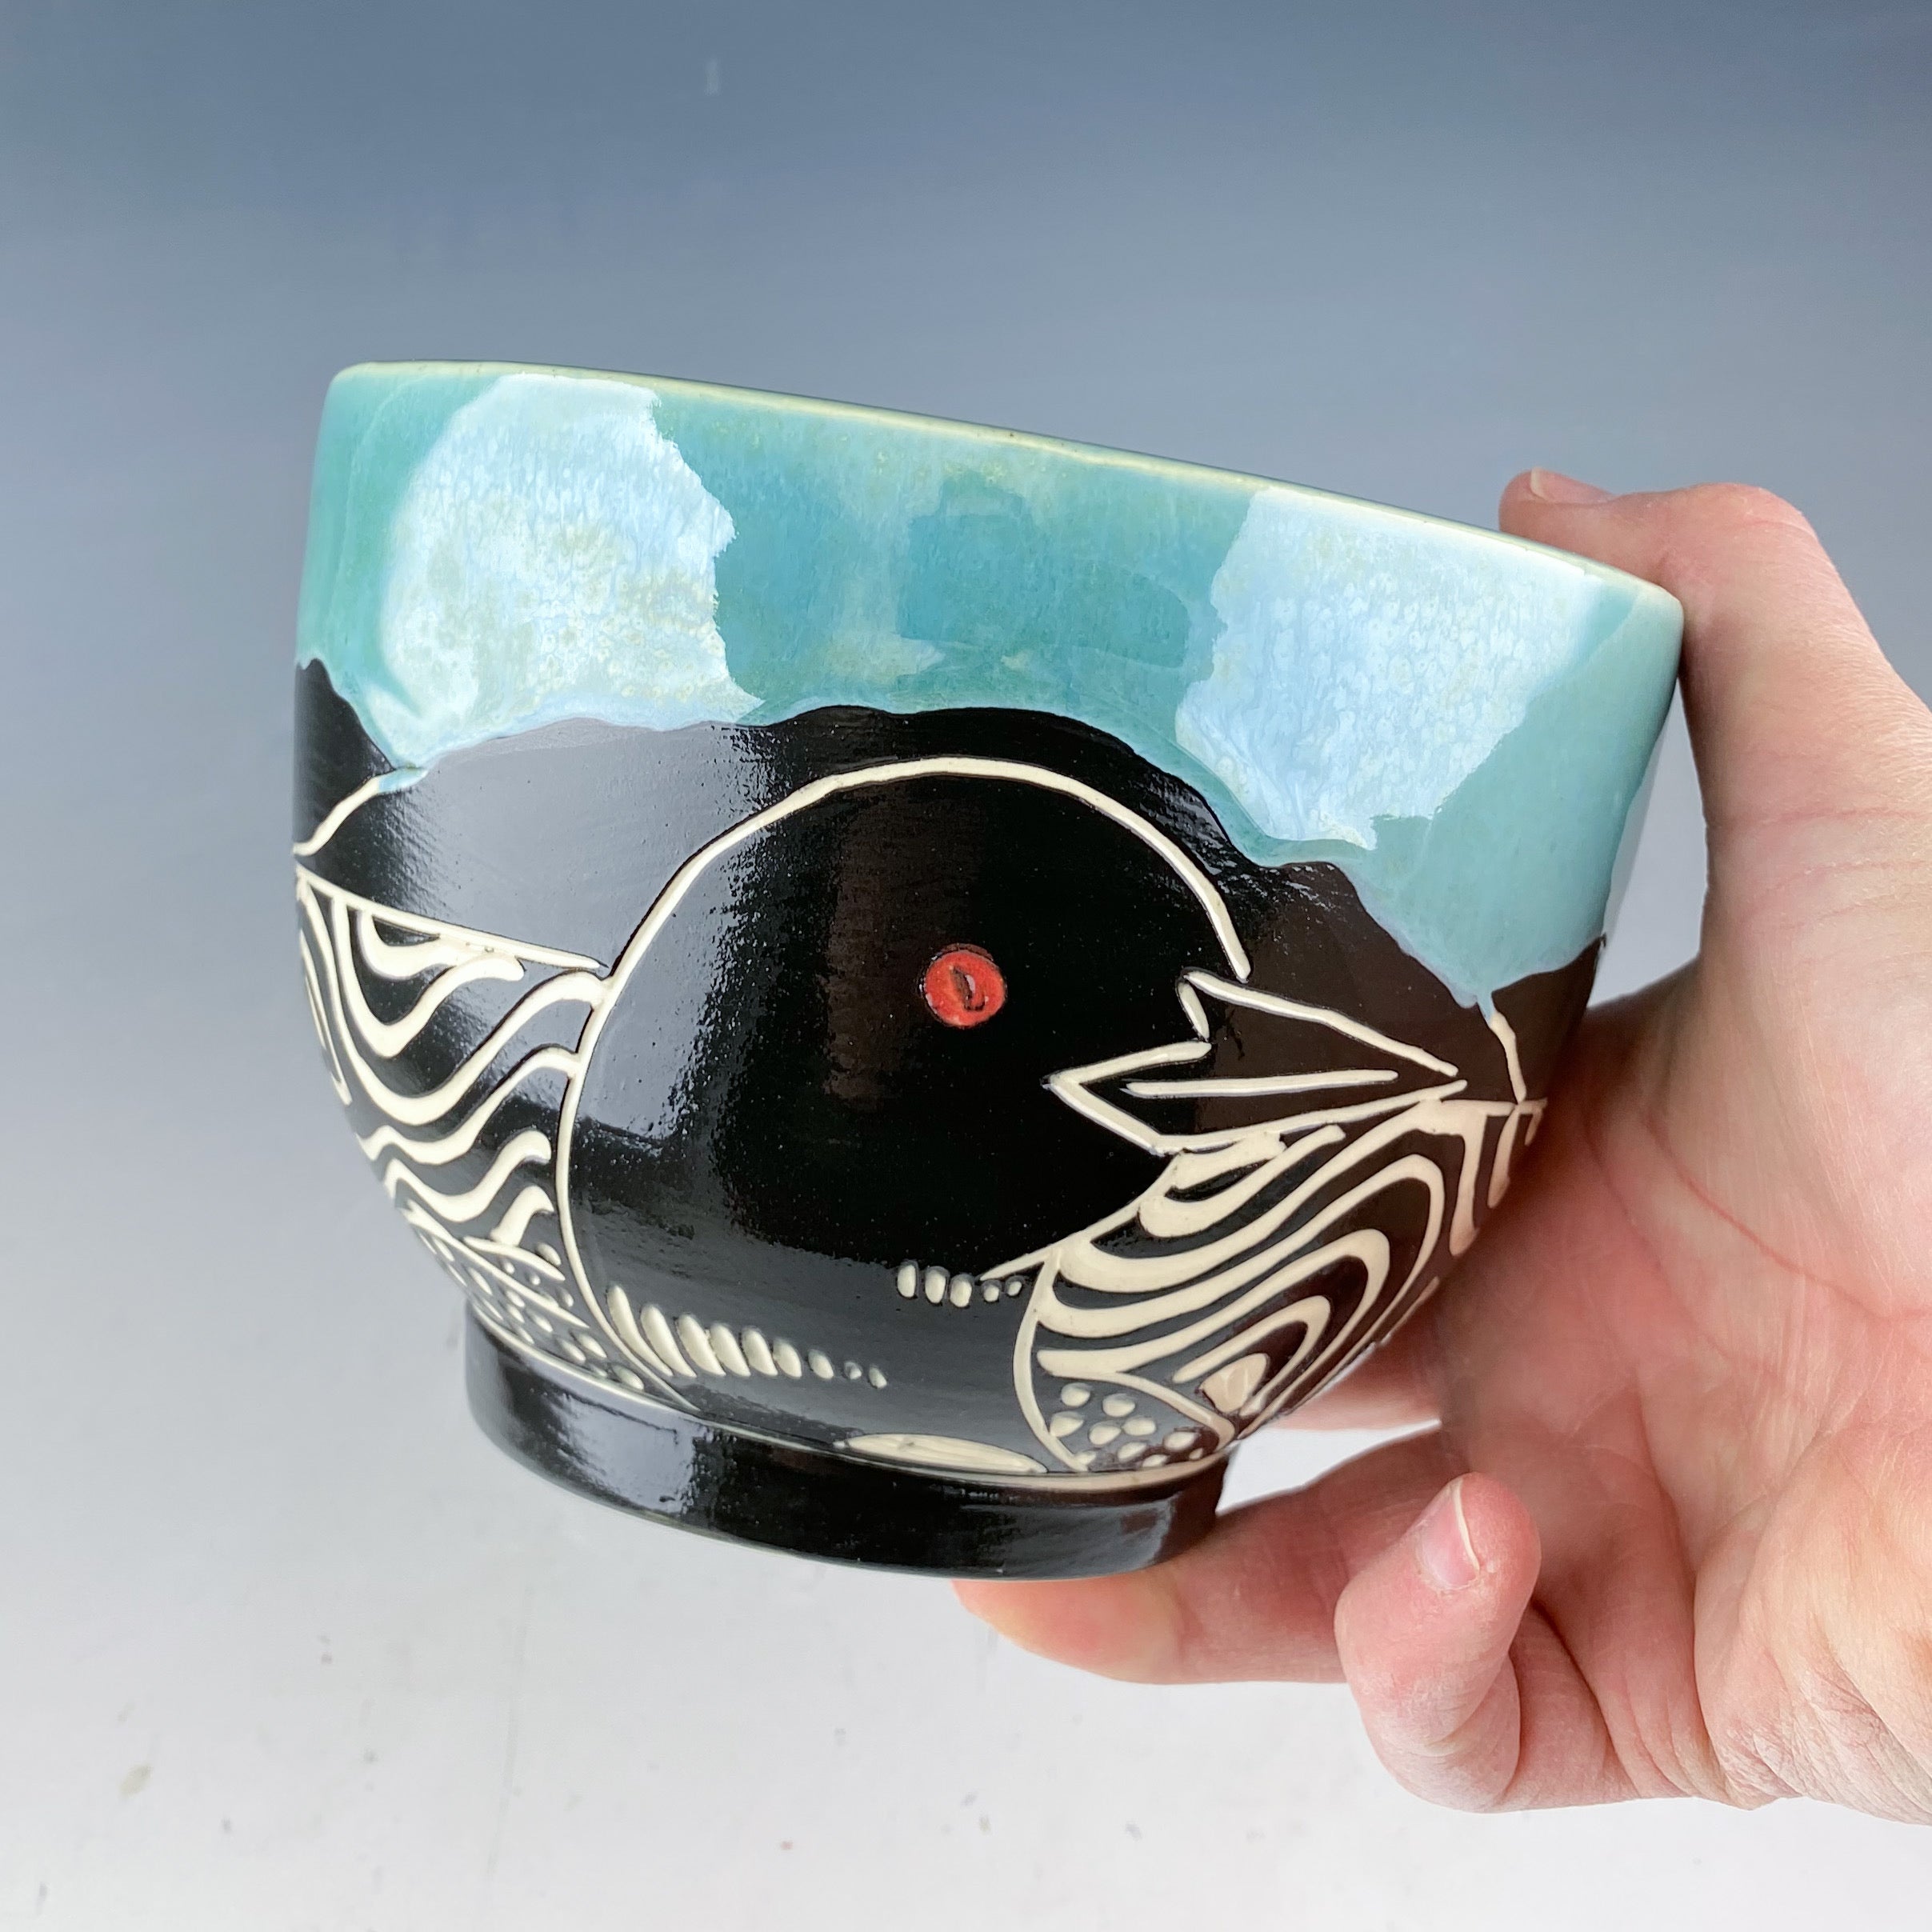 Cereal Bowls in Various Designs